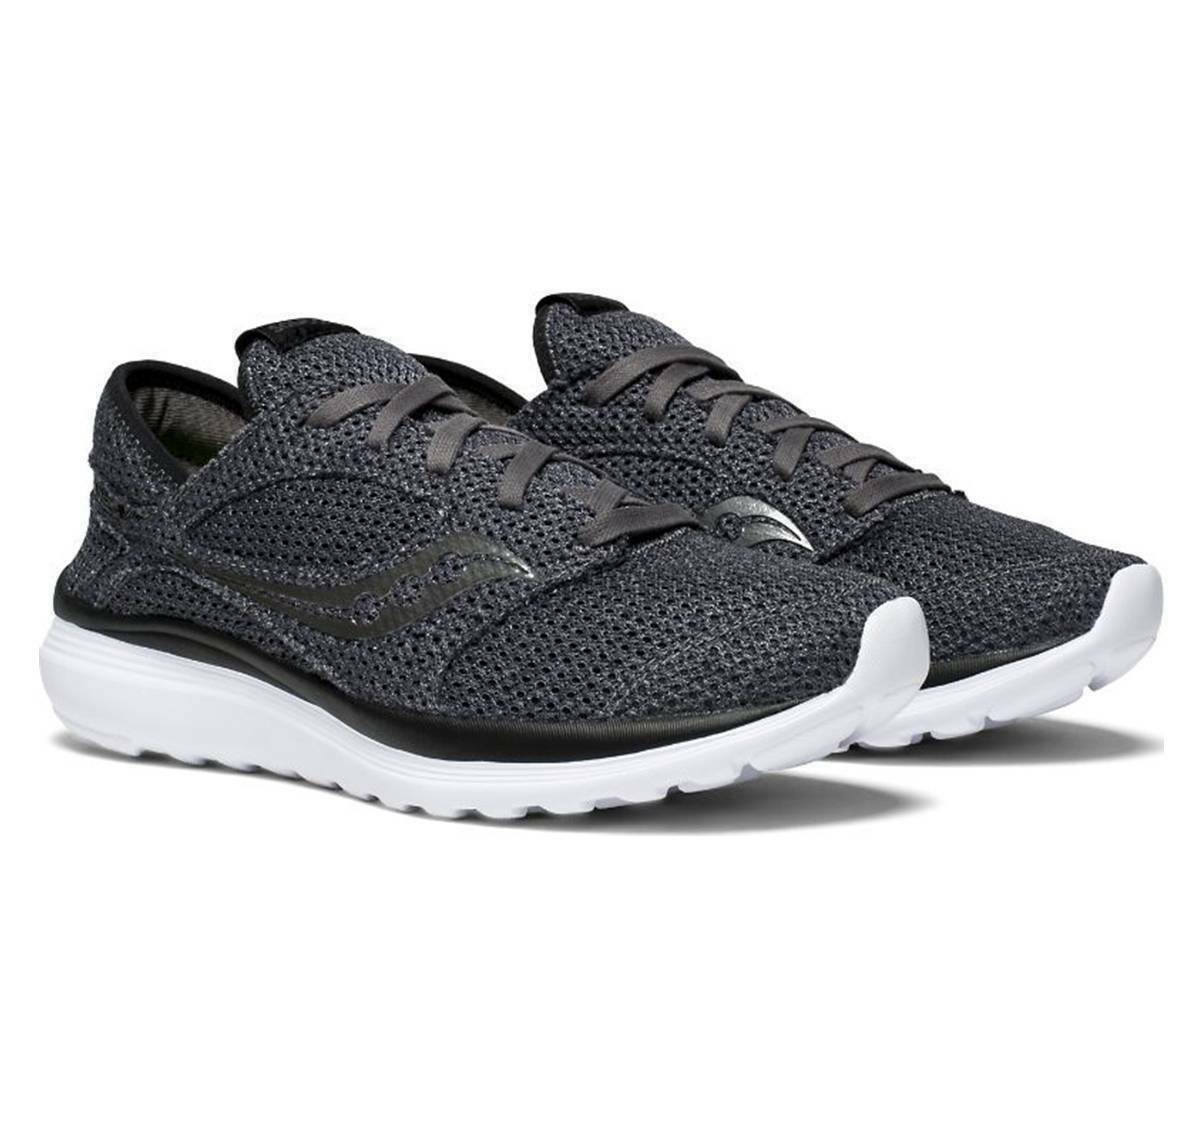 Saucony Women's Kineta Relay Running Shoe Charcoal, Size.5 M - Athletic